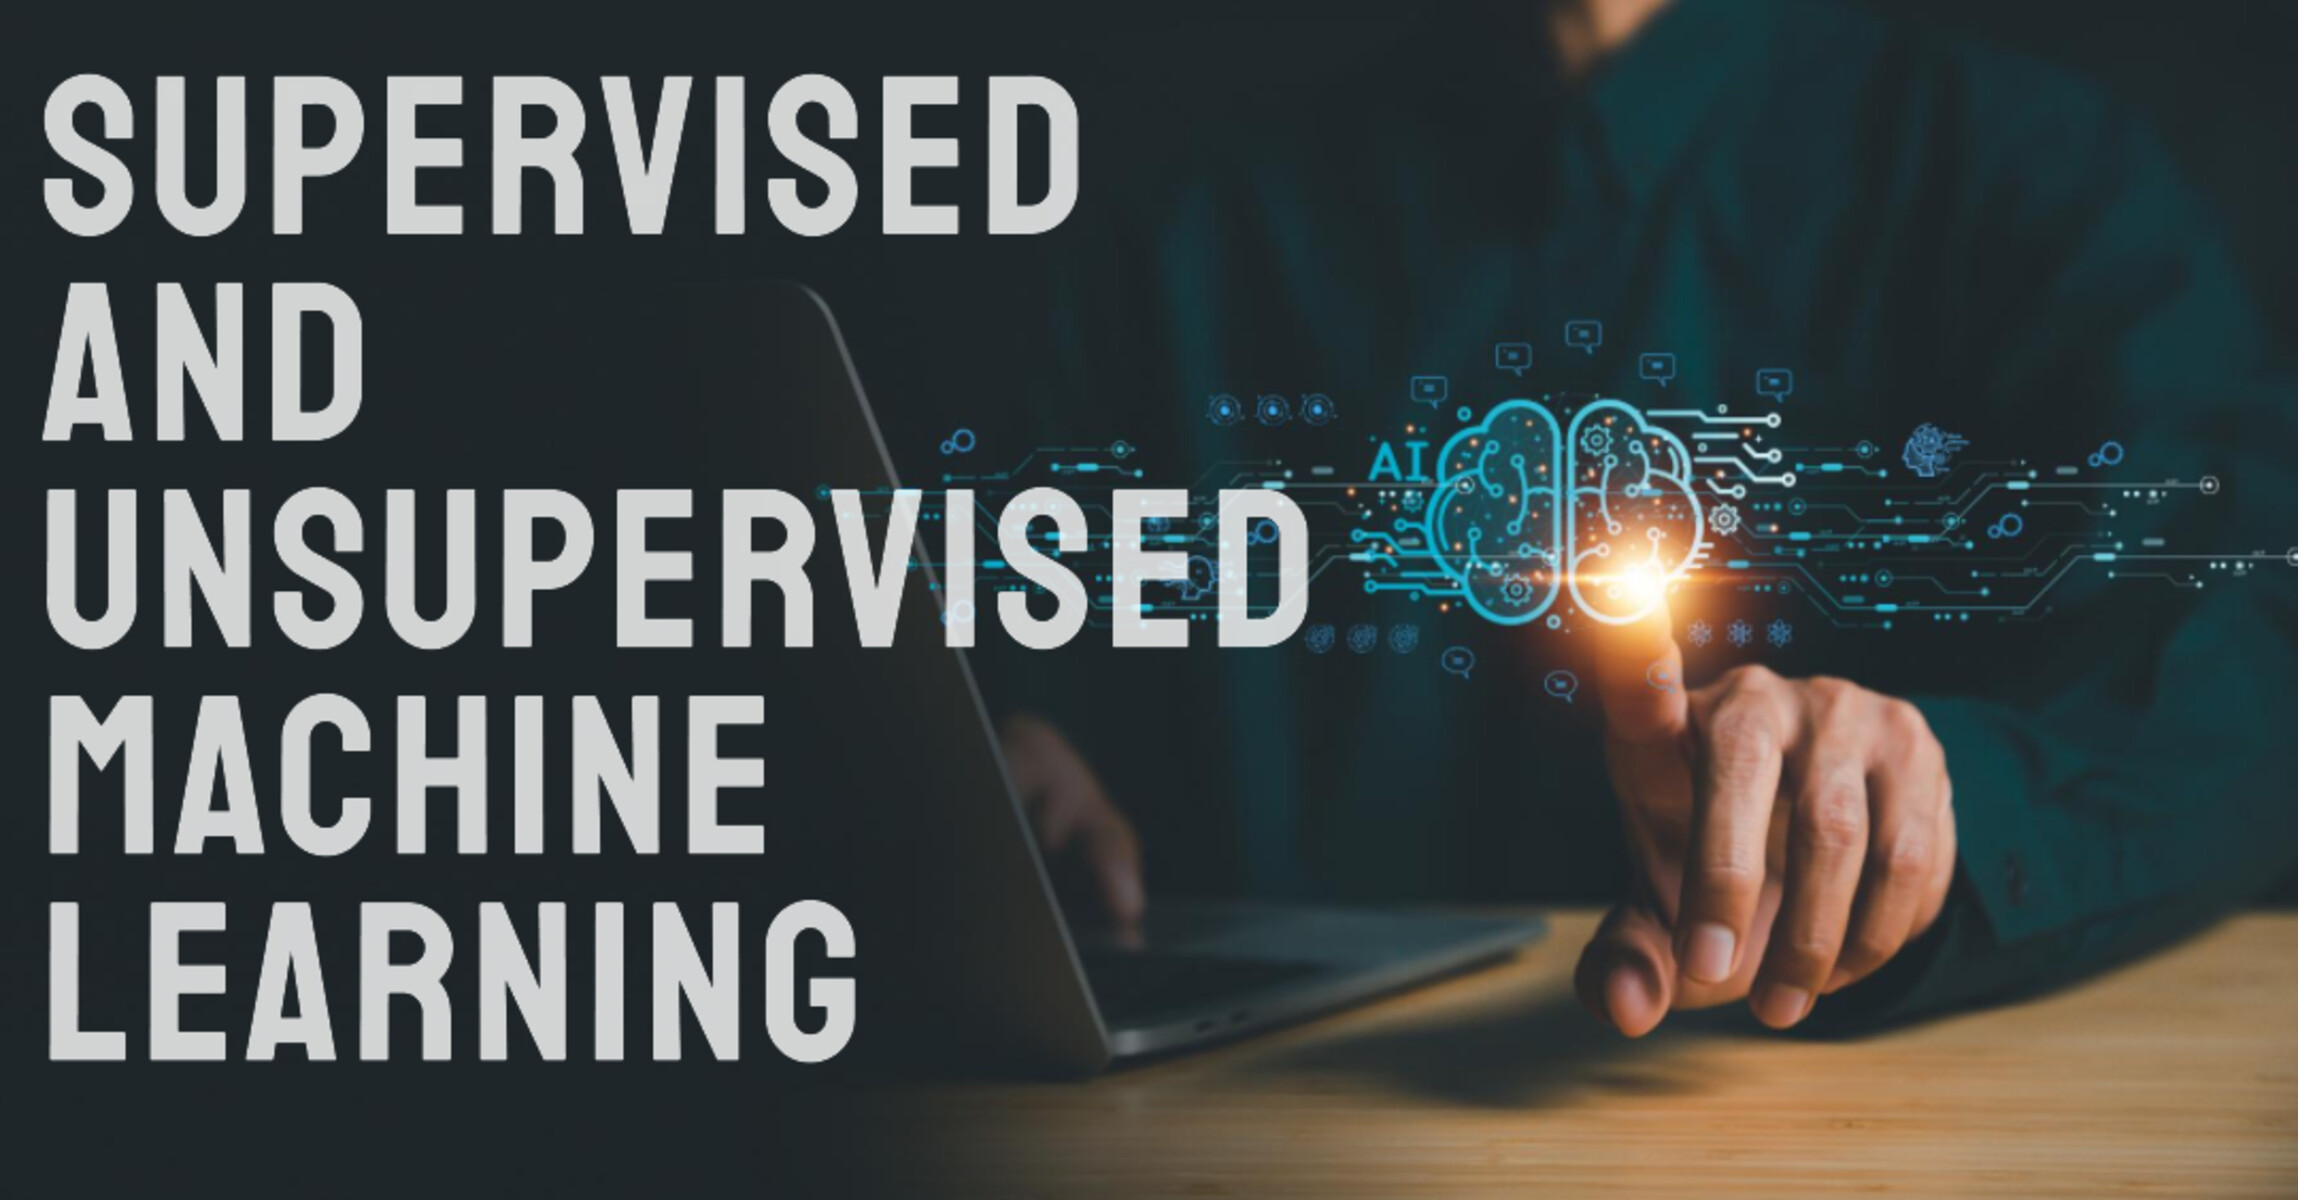 What Is The Difference Between Supervised And Unsupervised Machine Learning